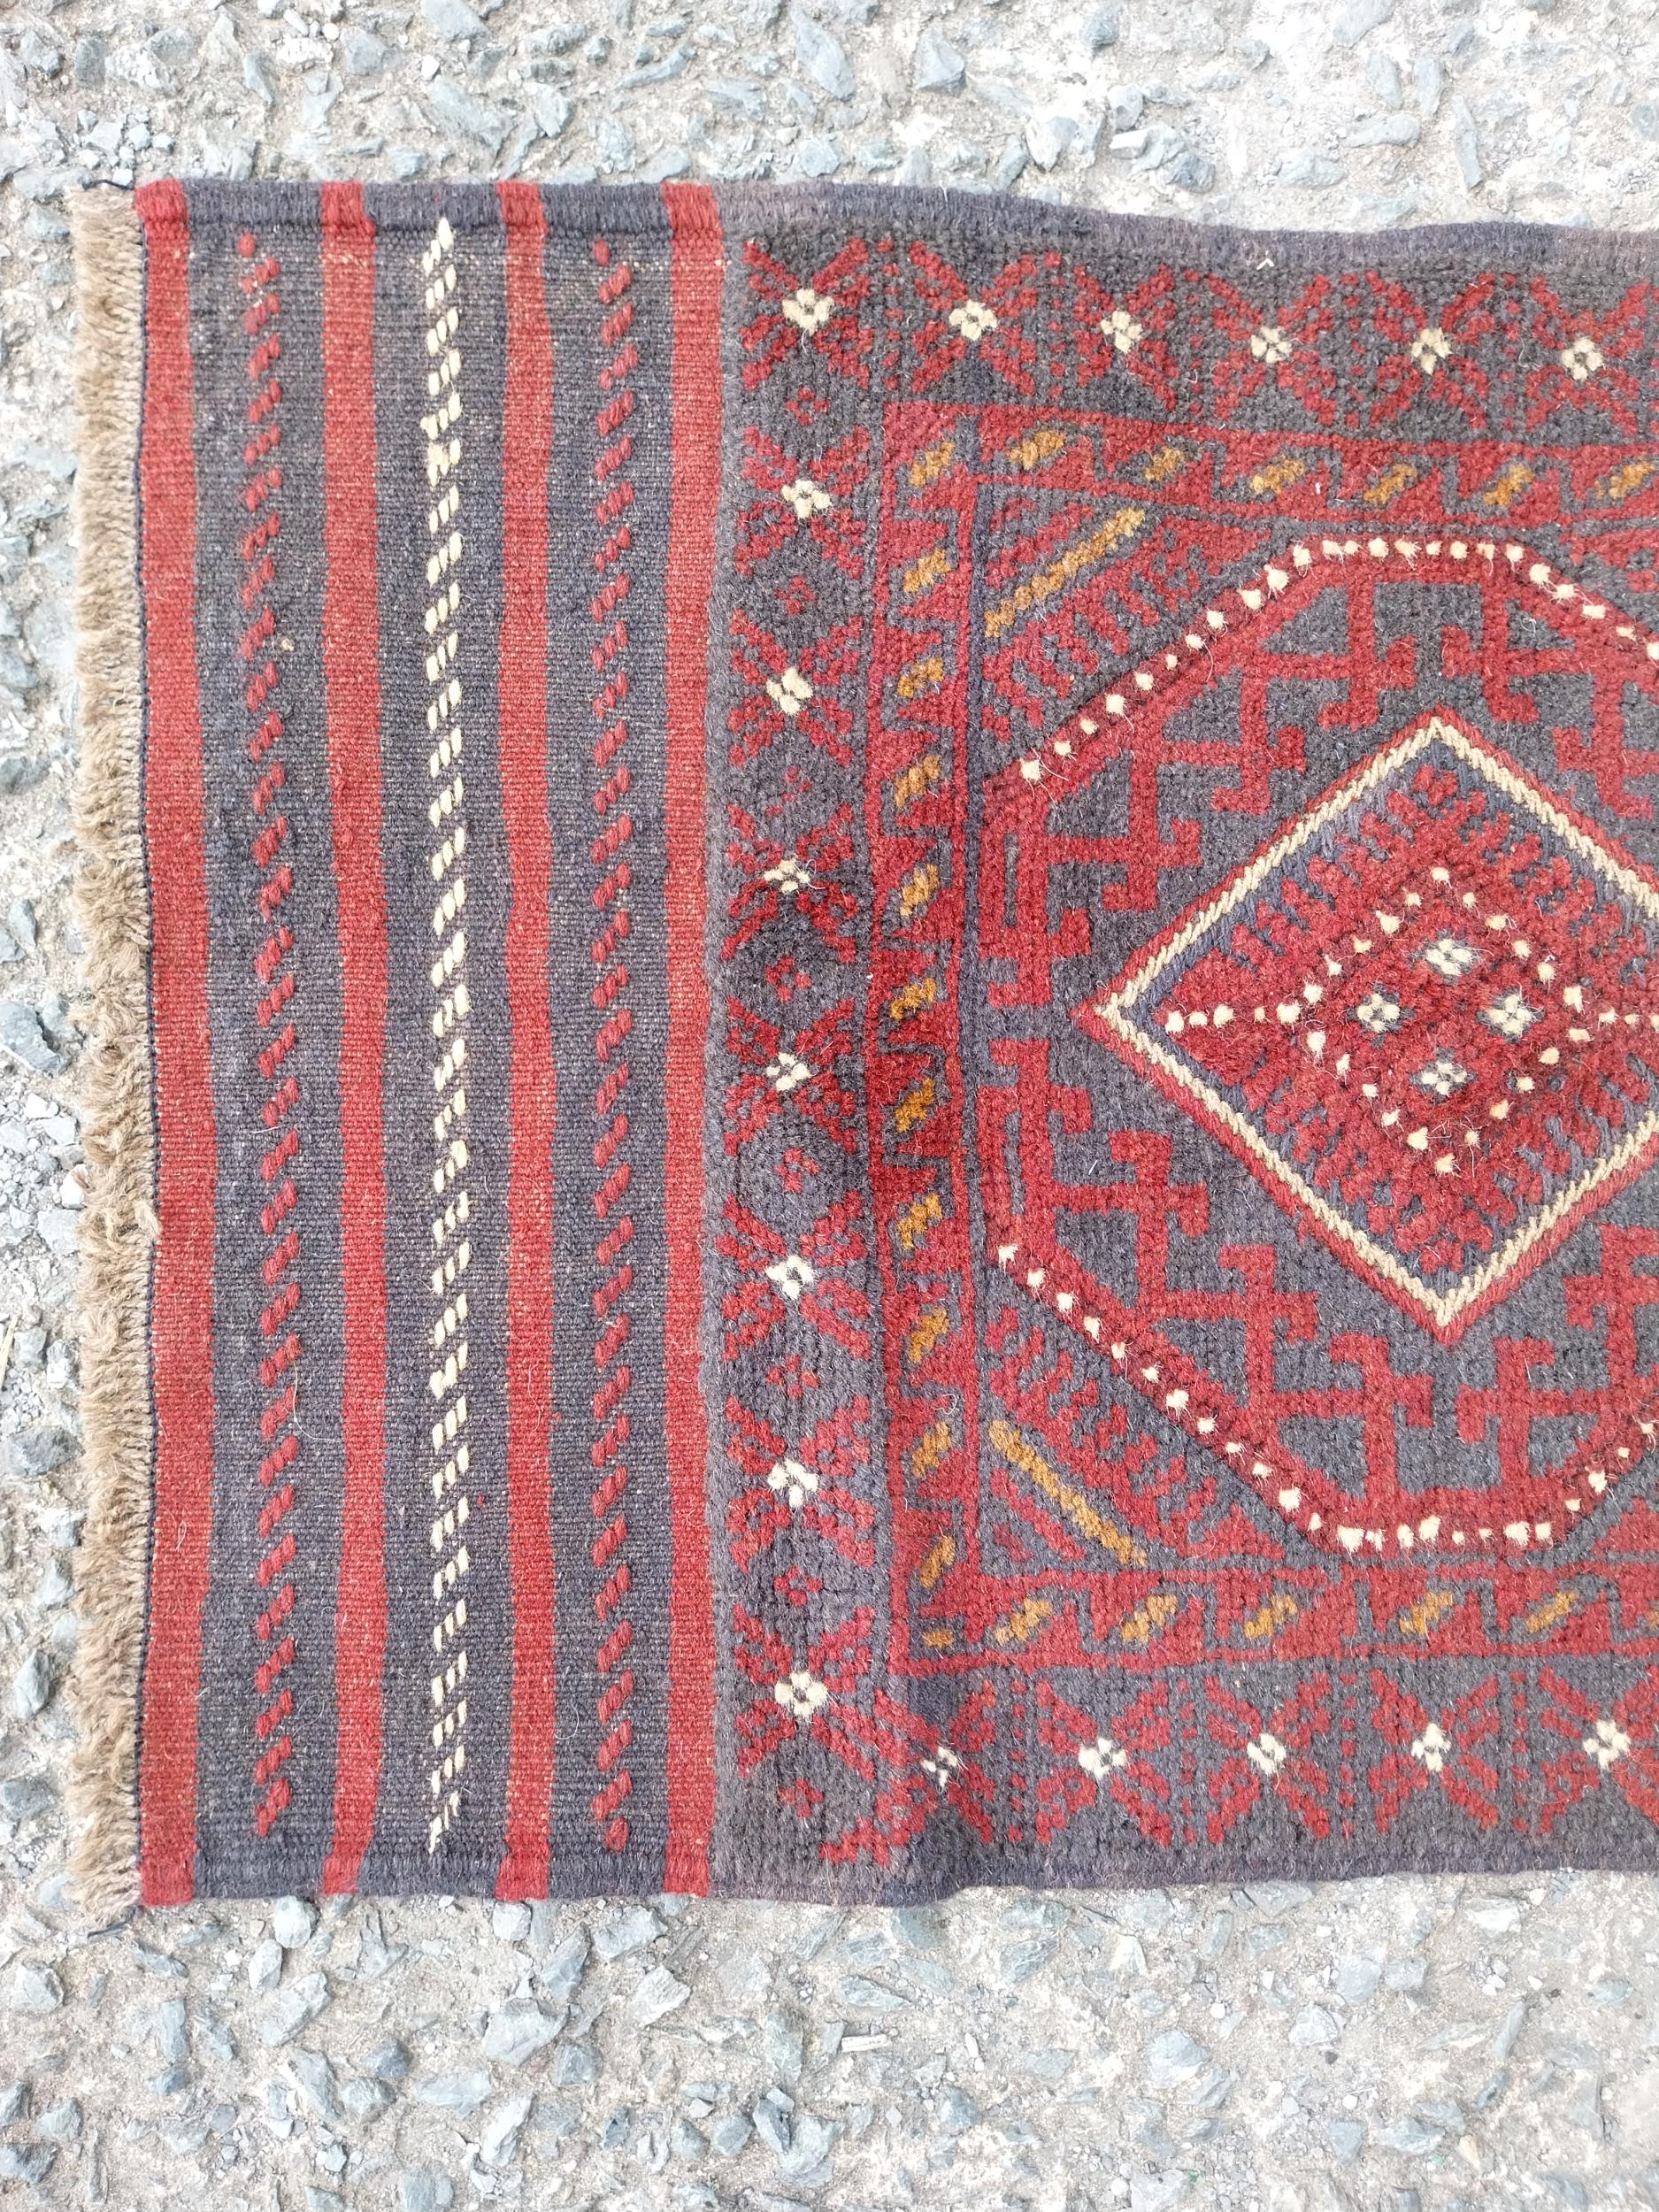 Good quality decorative carpet runner {240cm W x 60cm L} (not available to view in person). - Image 2 of 3